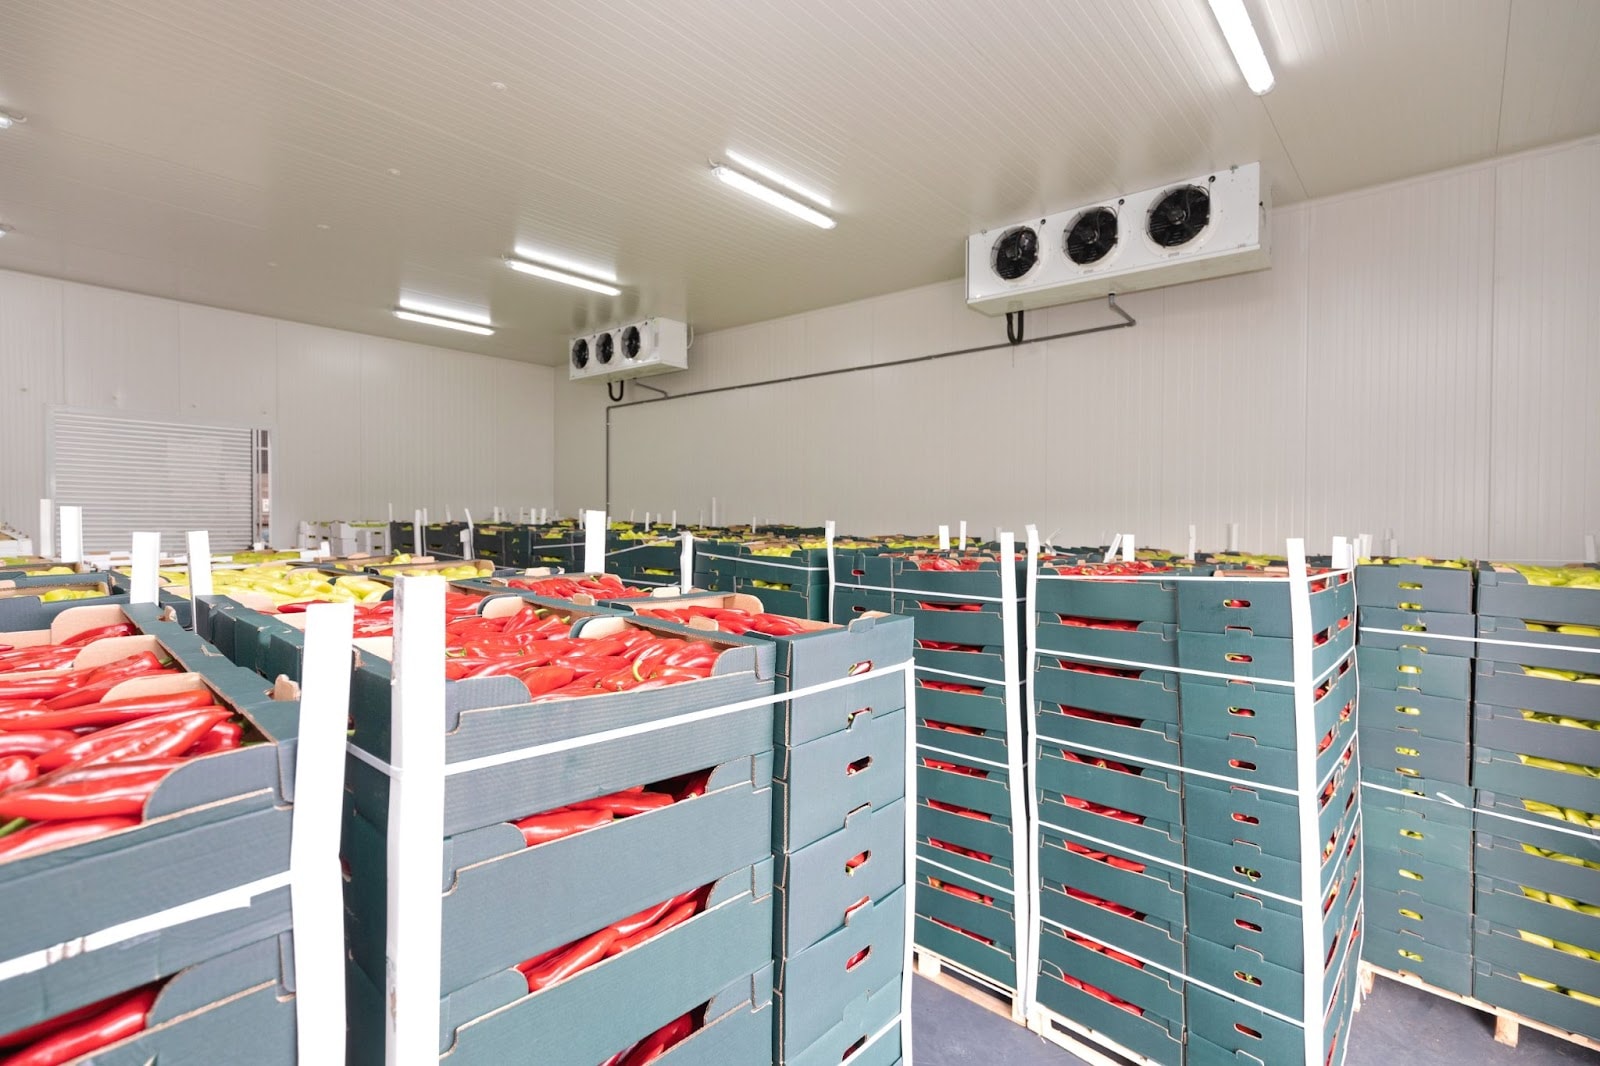 Cold Storage Warehouse: Definition, How It Works, and Key Features -  Inbound Logistics